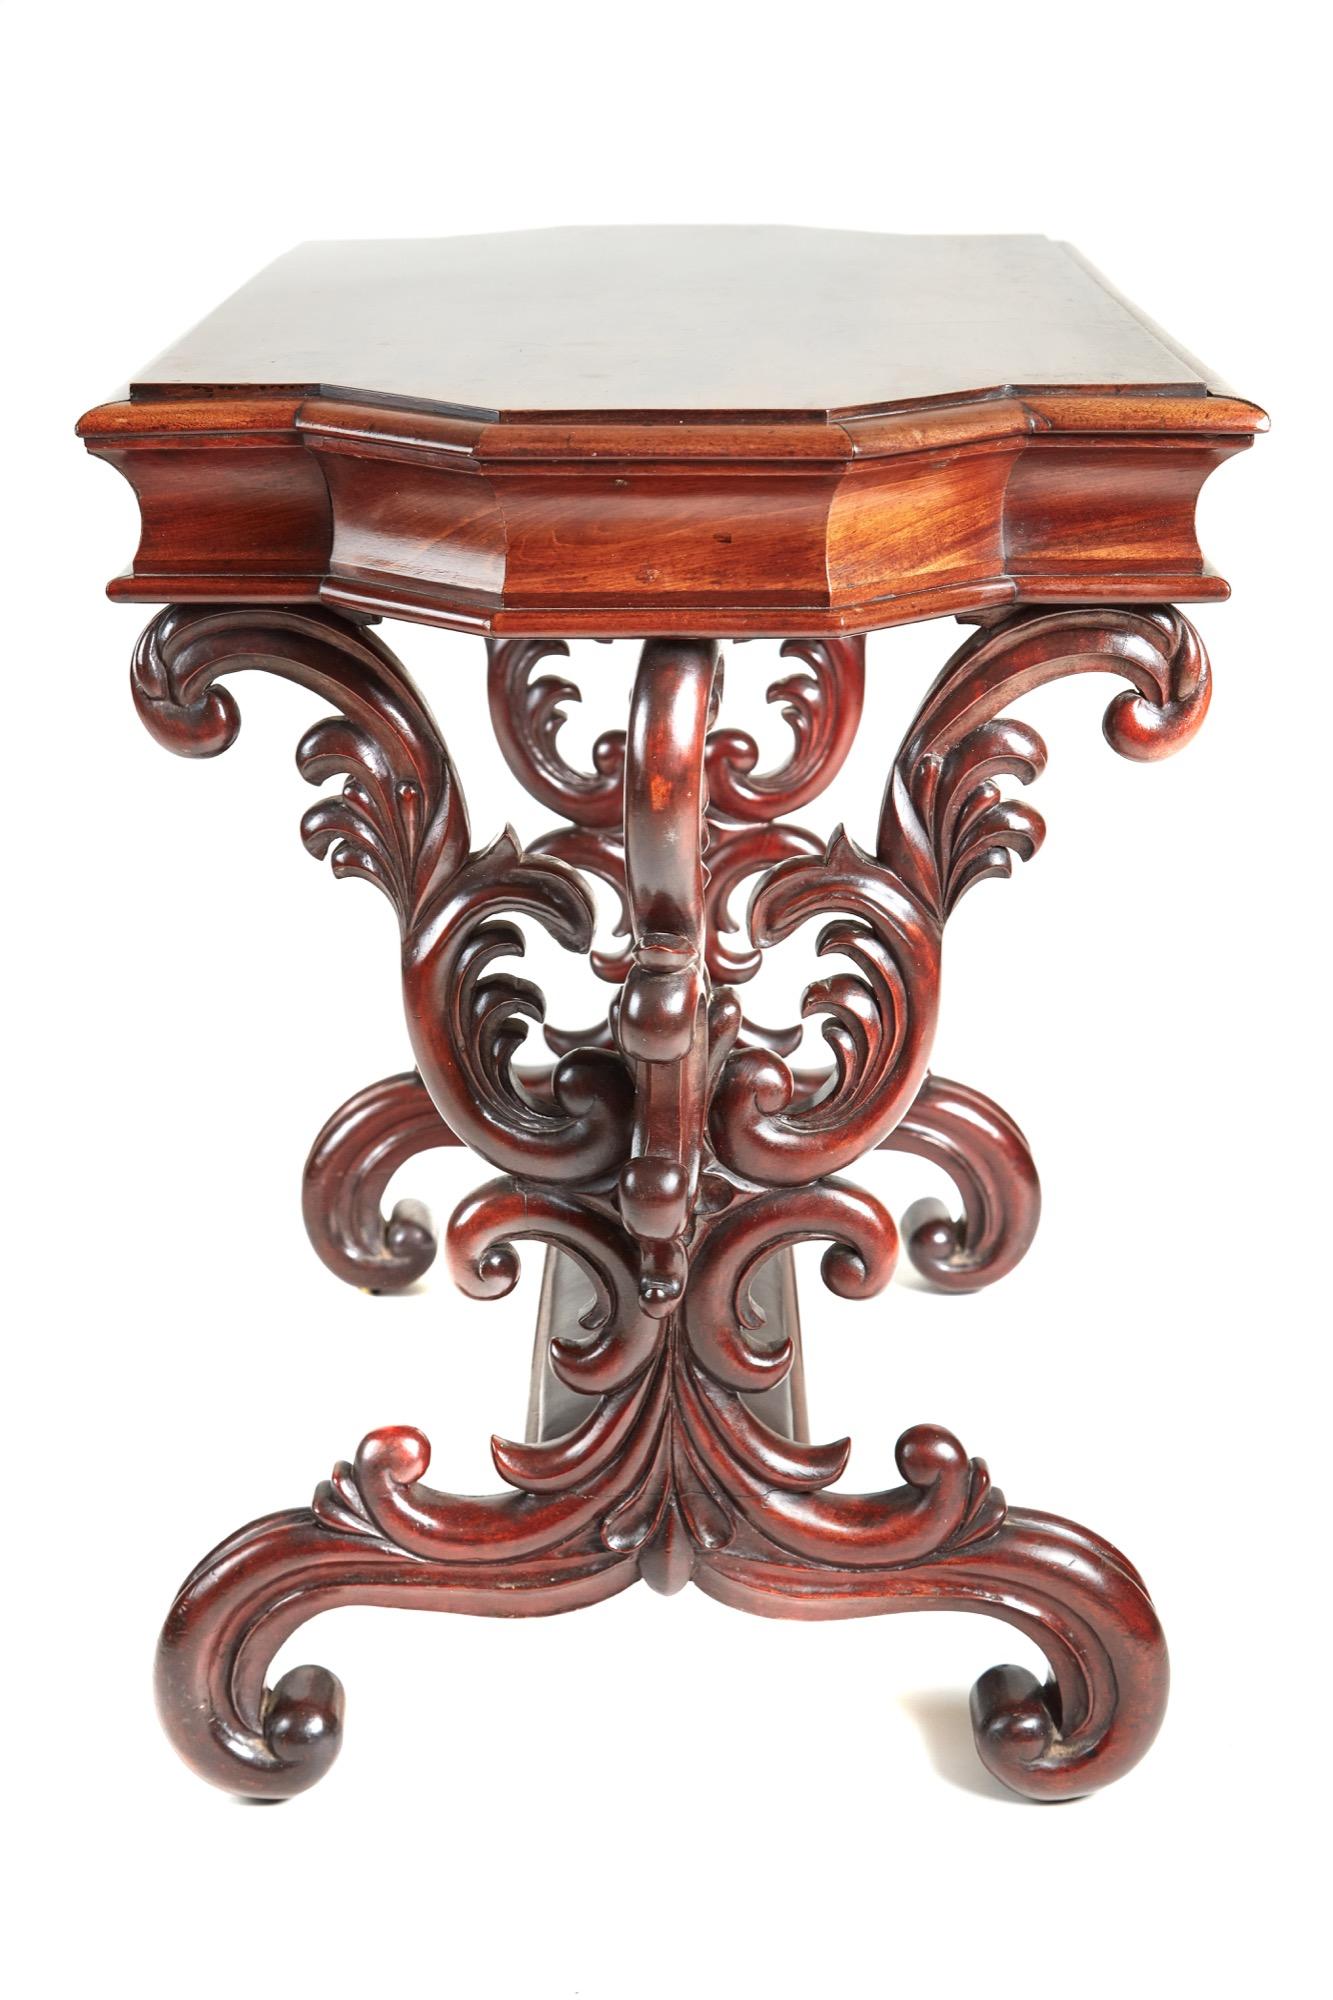 Early Victorian Outstanding Quality Carved Antique Mahogany Centre Table, circa 1850 For Sale